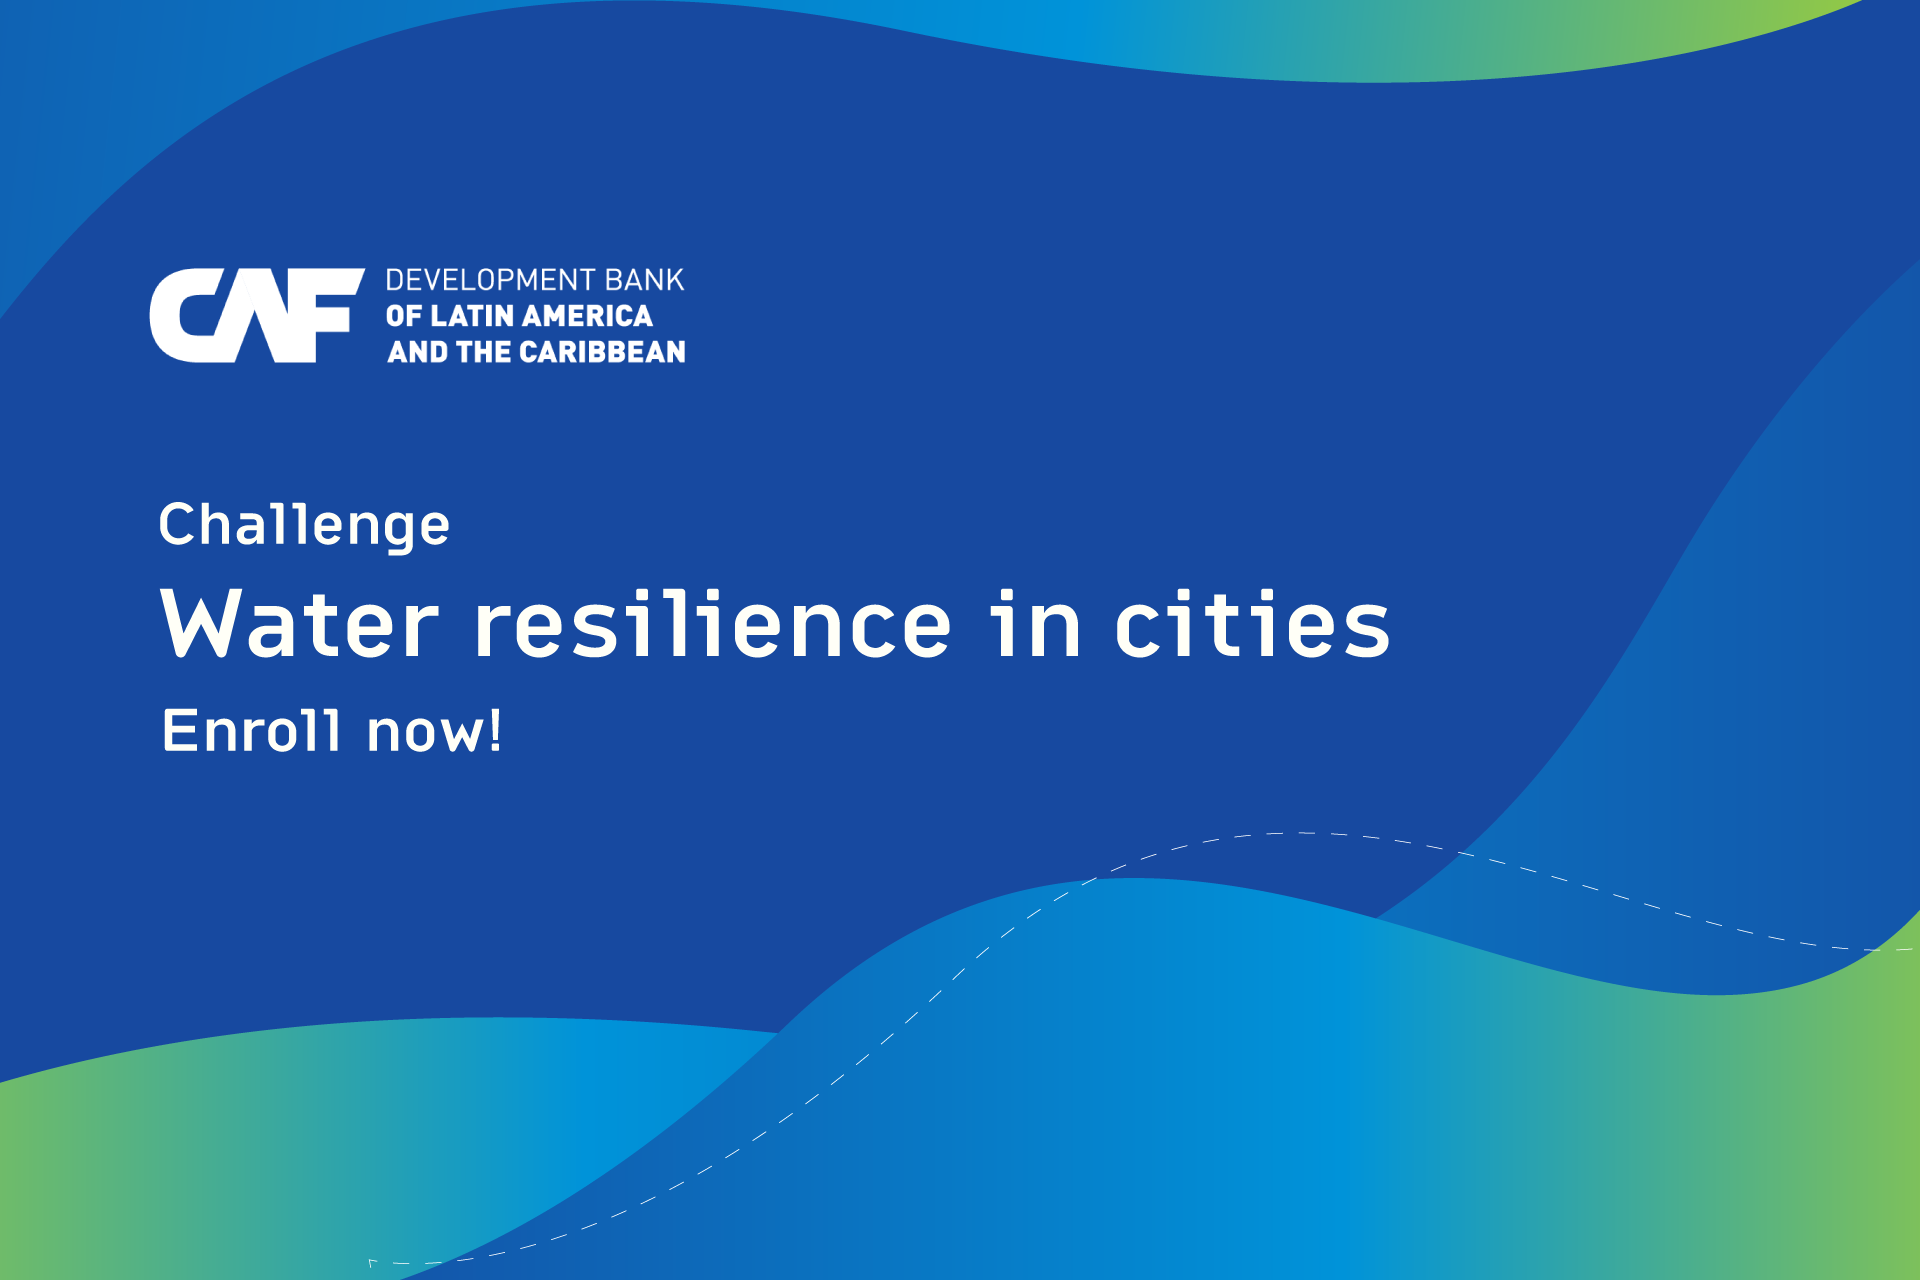 Water resilience in cities Challenge